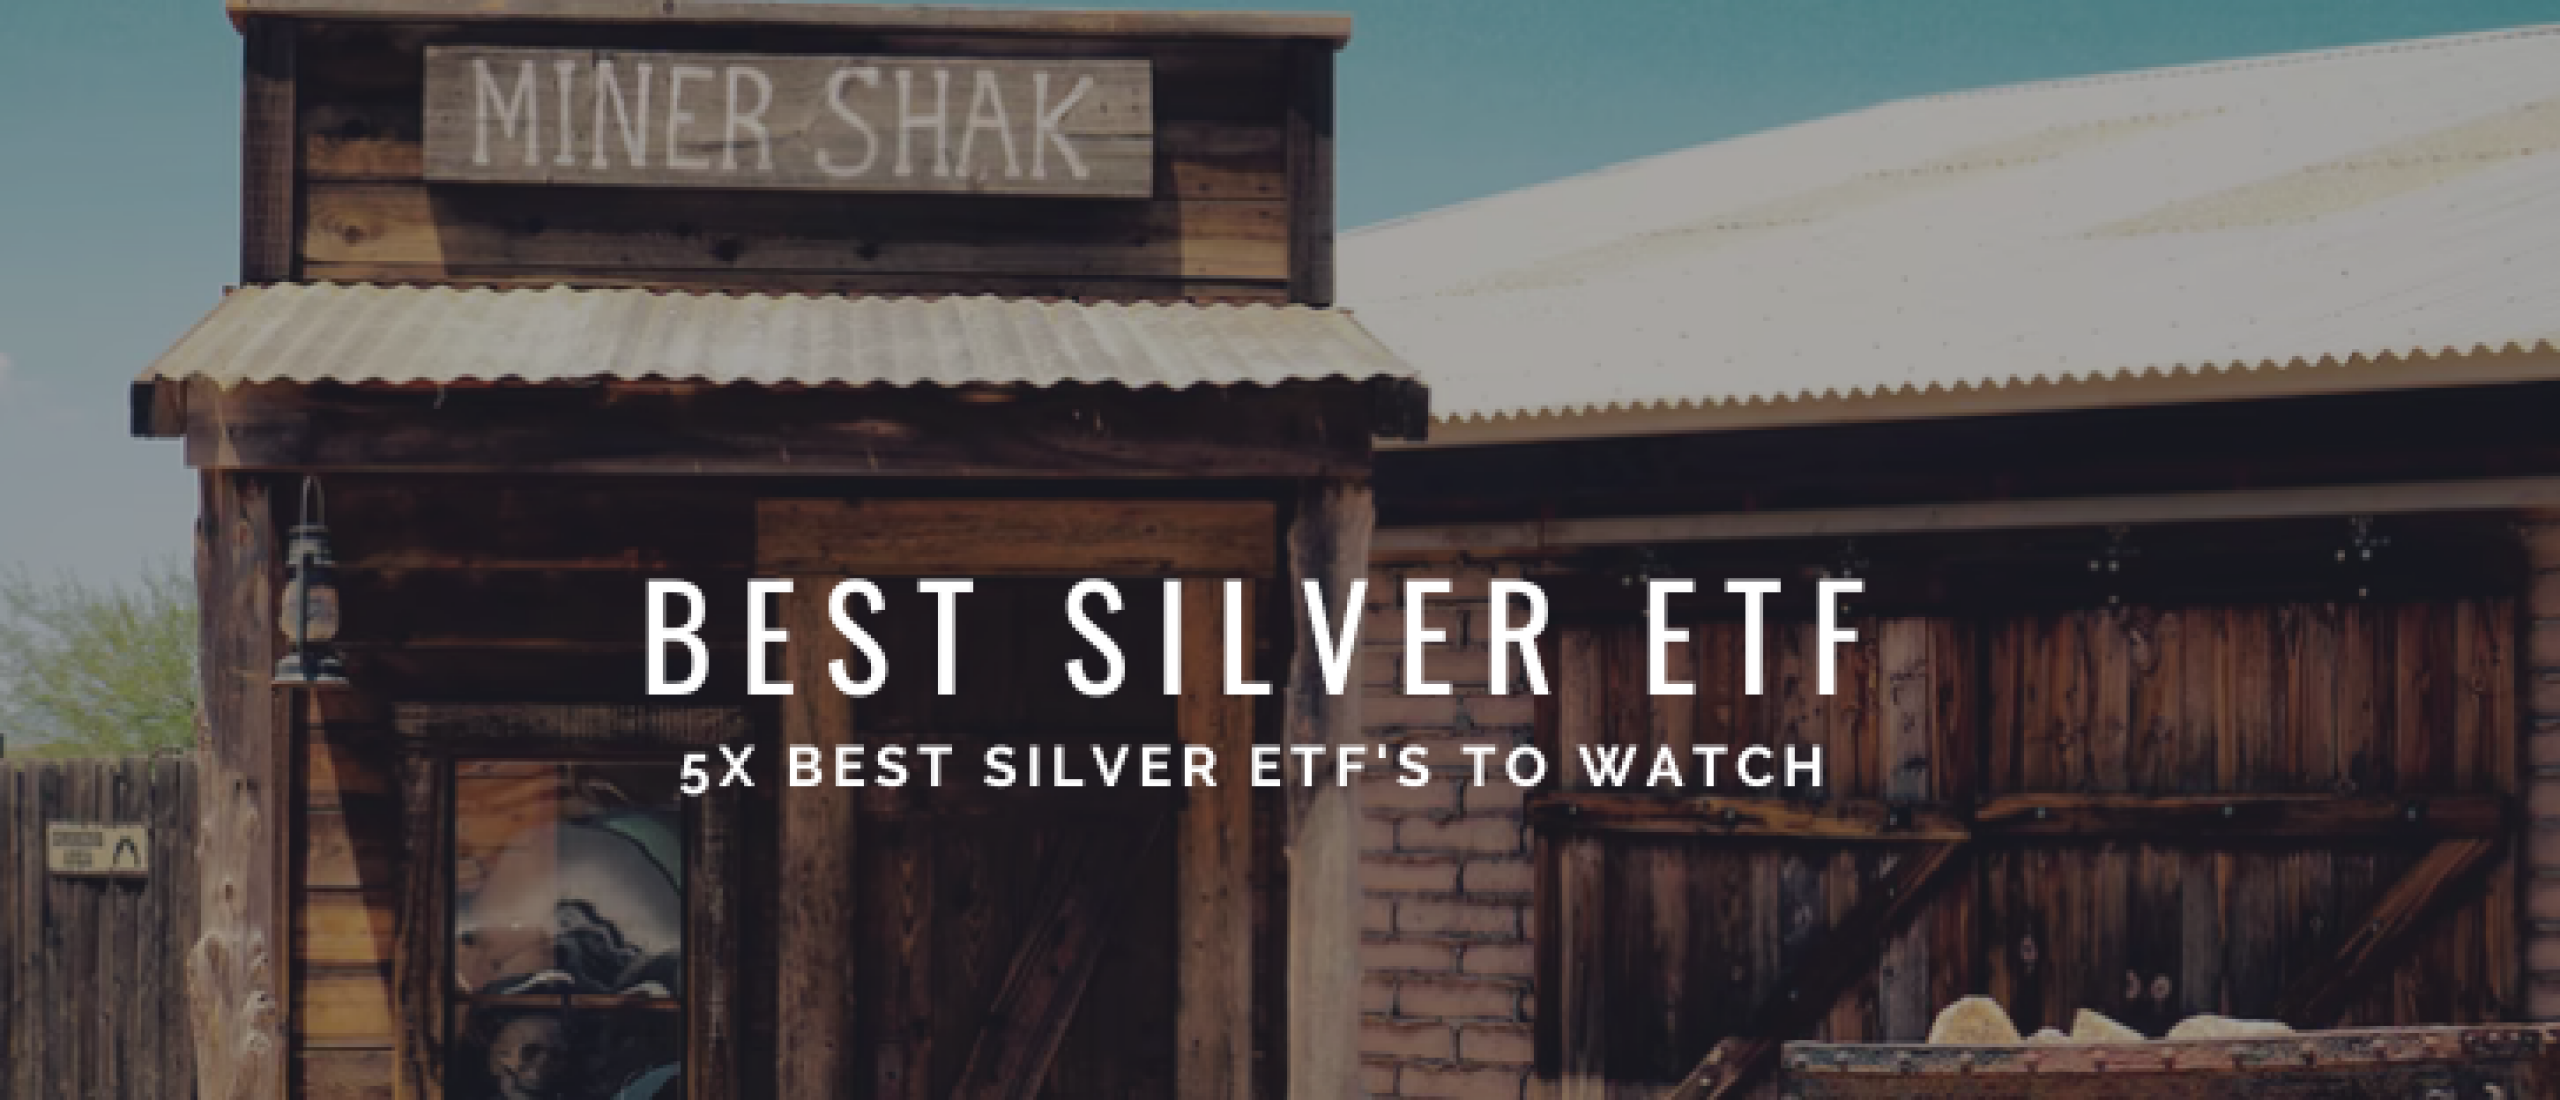 5x Best Silver ETF’s for Long-Term Investing | Happy Investors